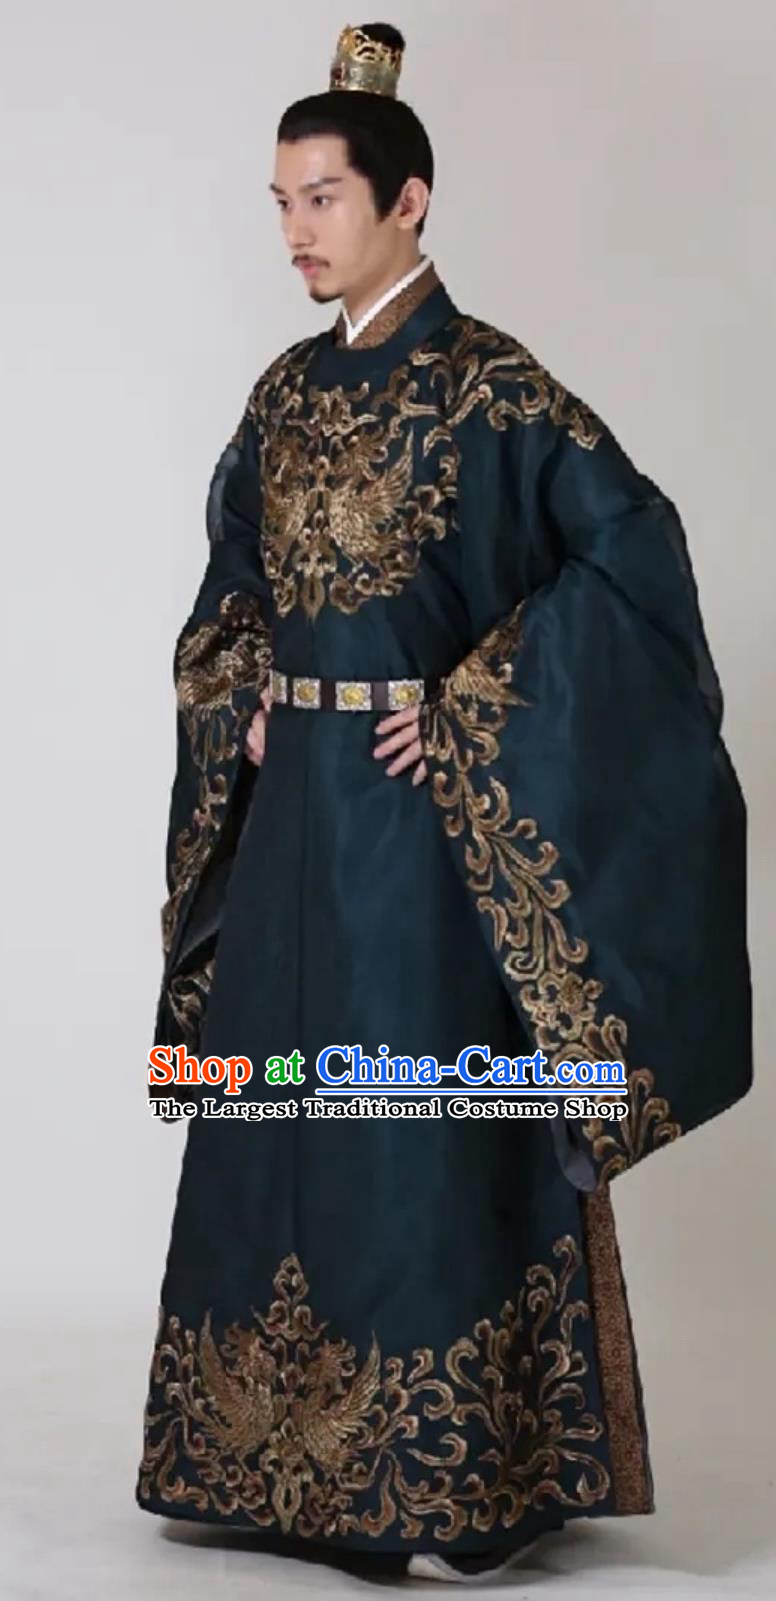 TV Series The Promise of Chang An Xiao Cheng Xu Robes Ancient China Prince Clothing Chinese Traditional Song Dynasty King Embroidered Costume